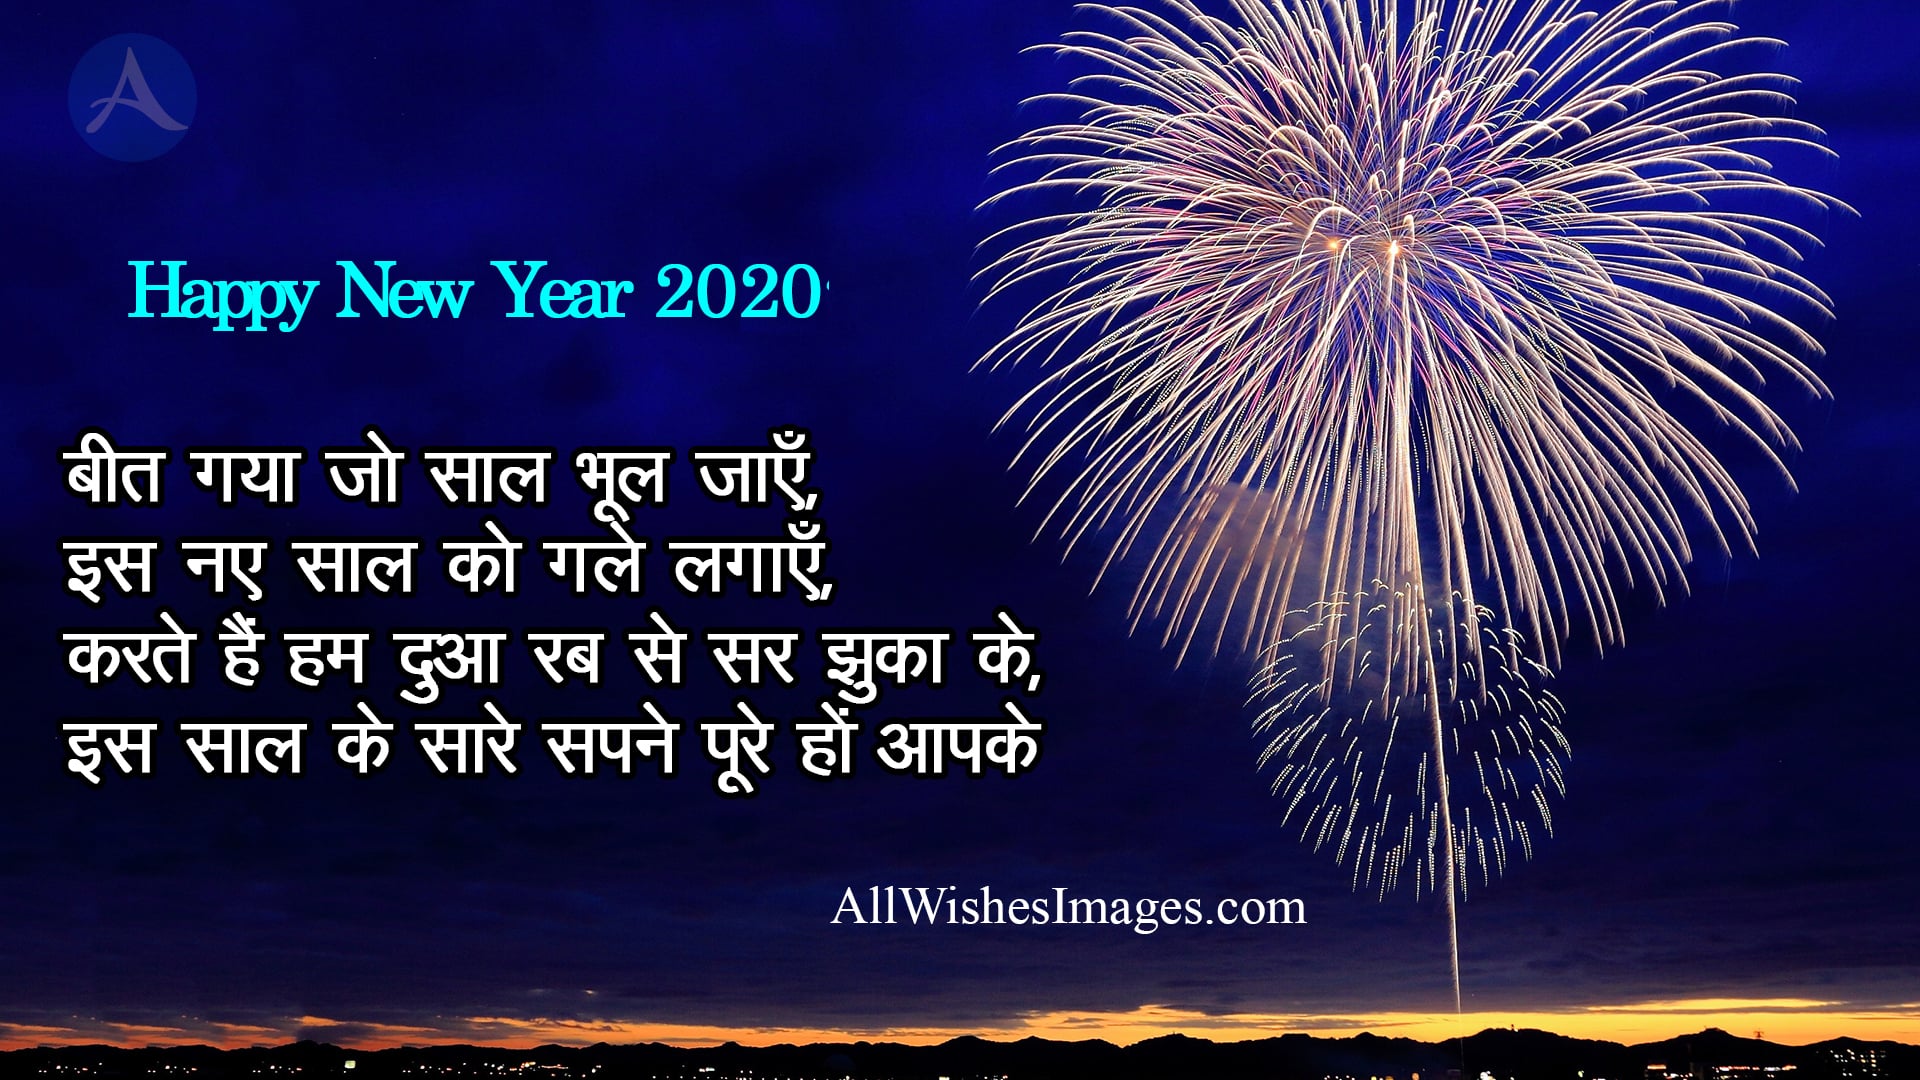 Happy New Year Shayari Photo 2019 - All Wishes Images - Images for WhatsApp